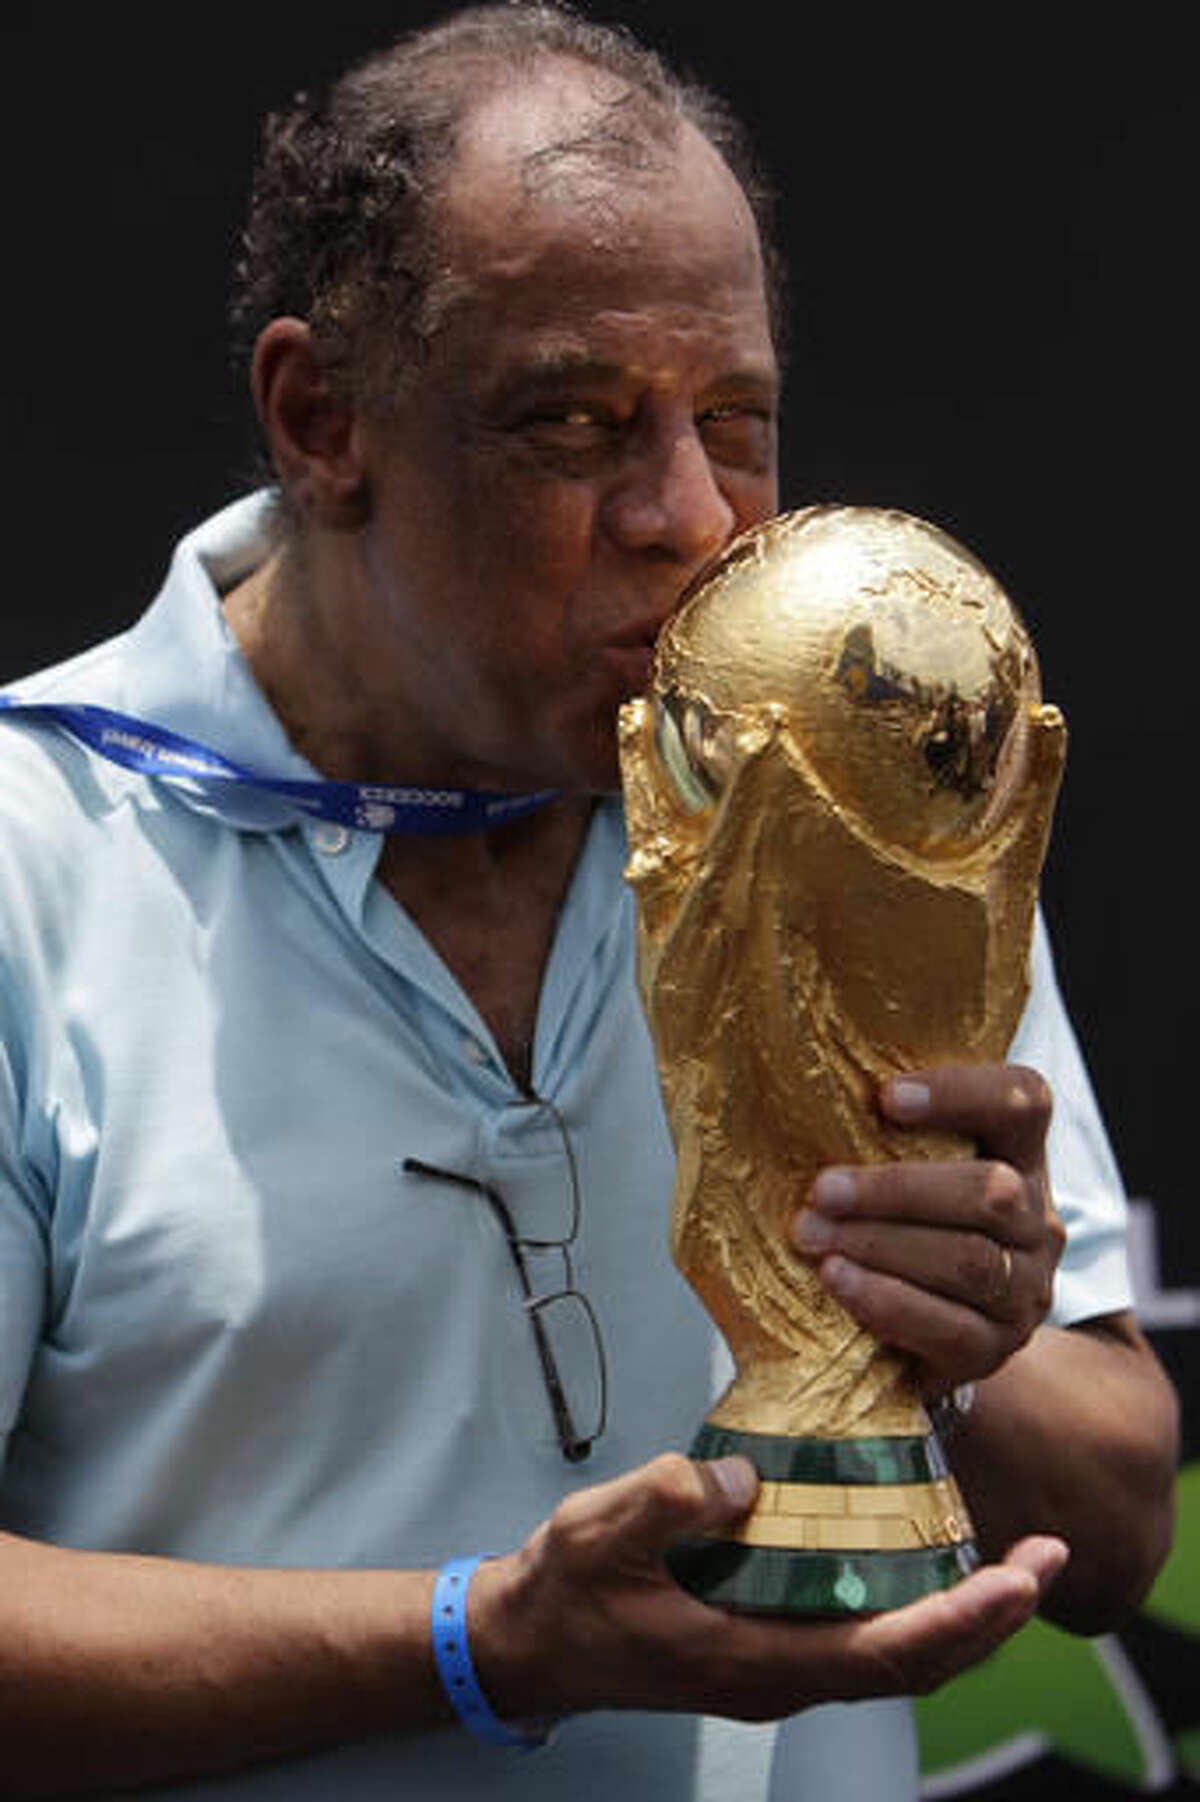 Soccer: 2014 FIFA World Cup Trophy